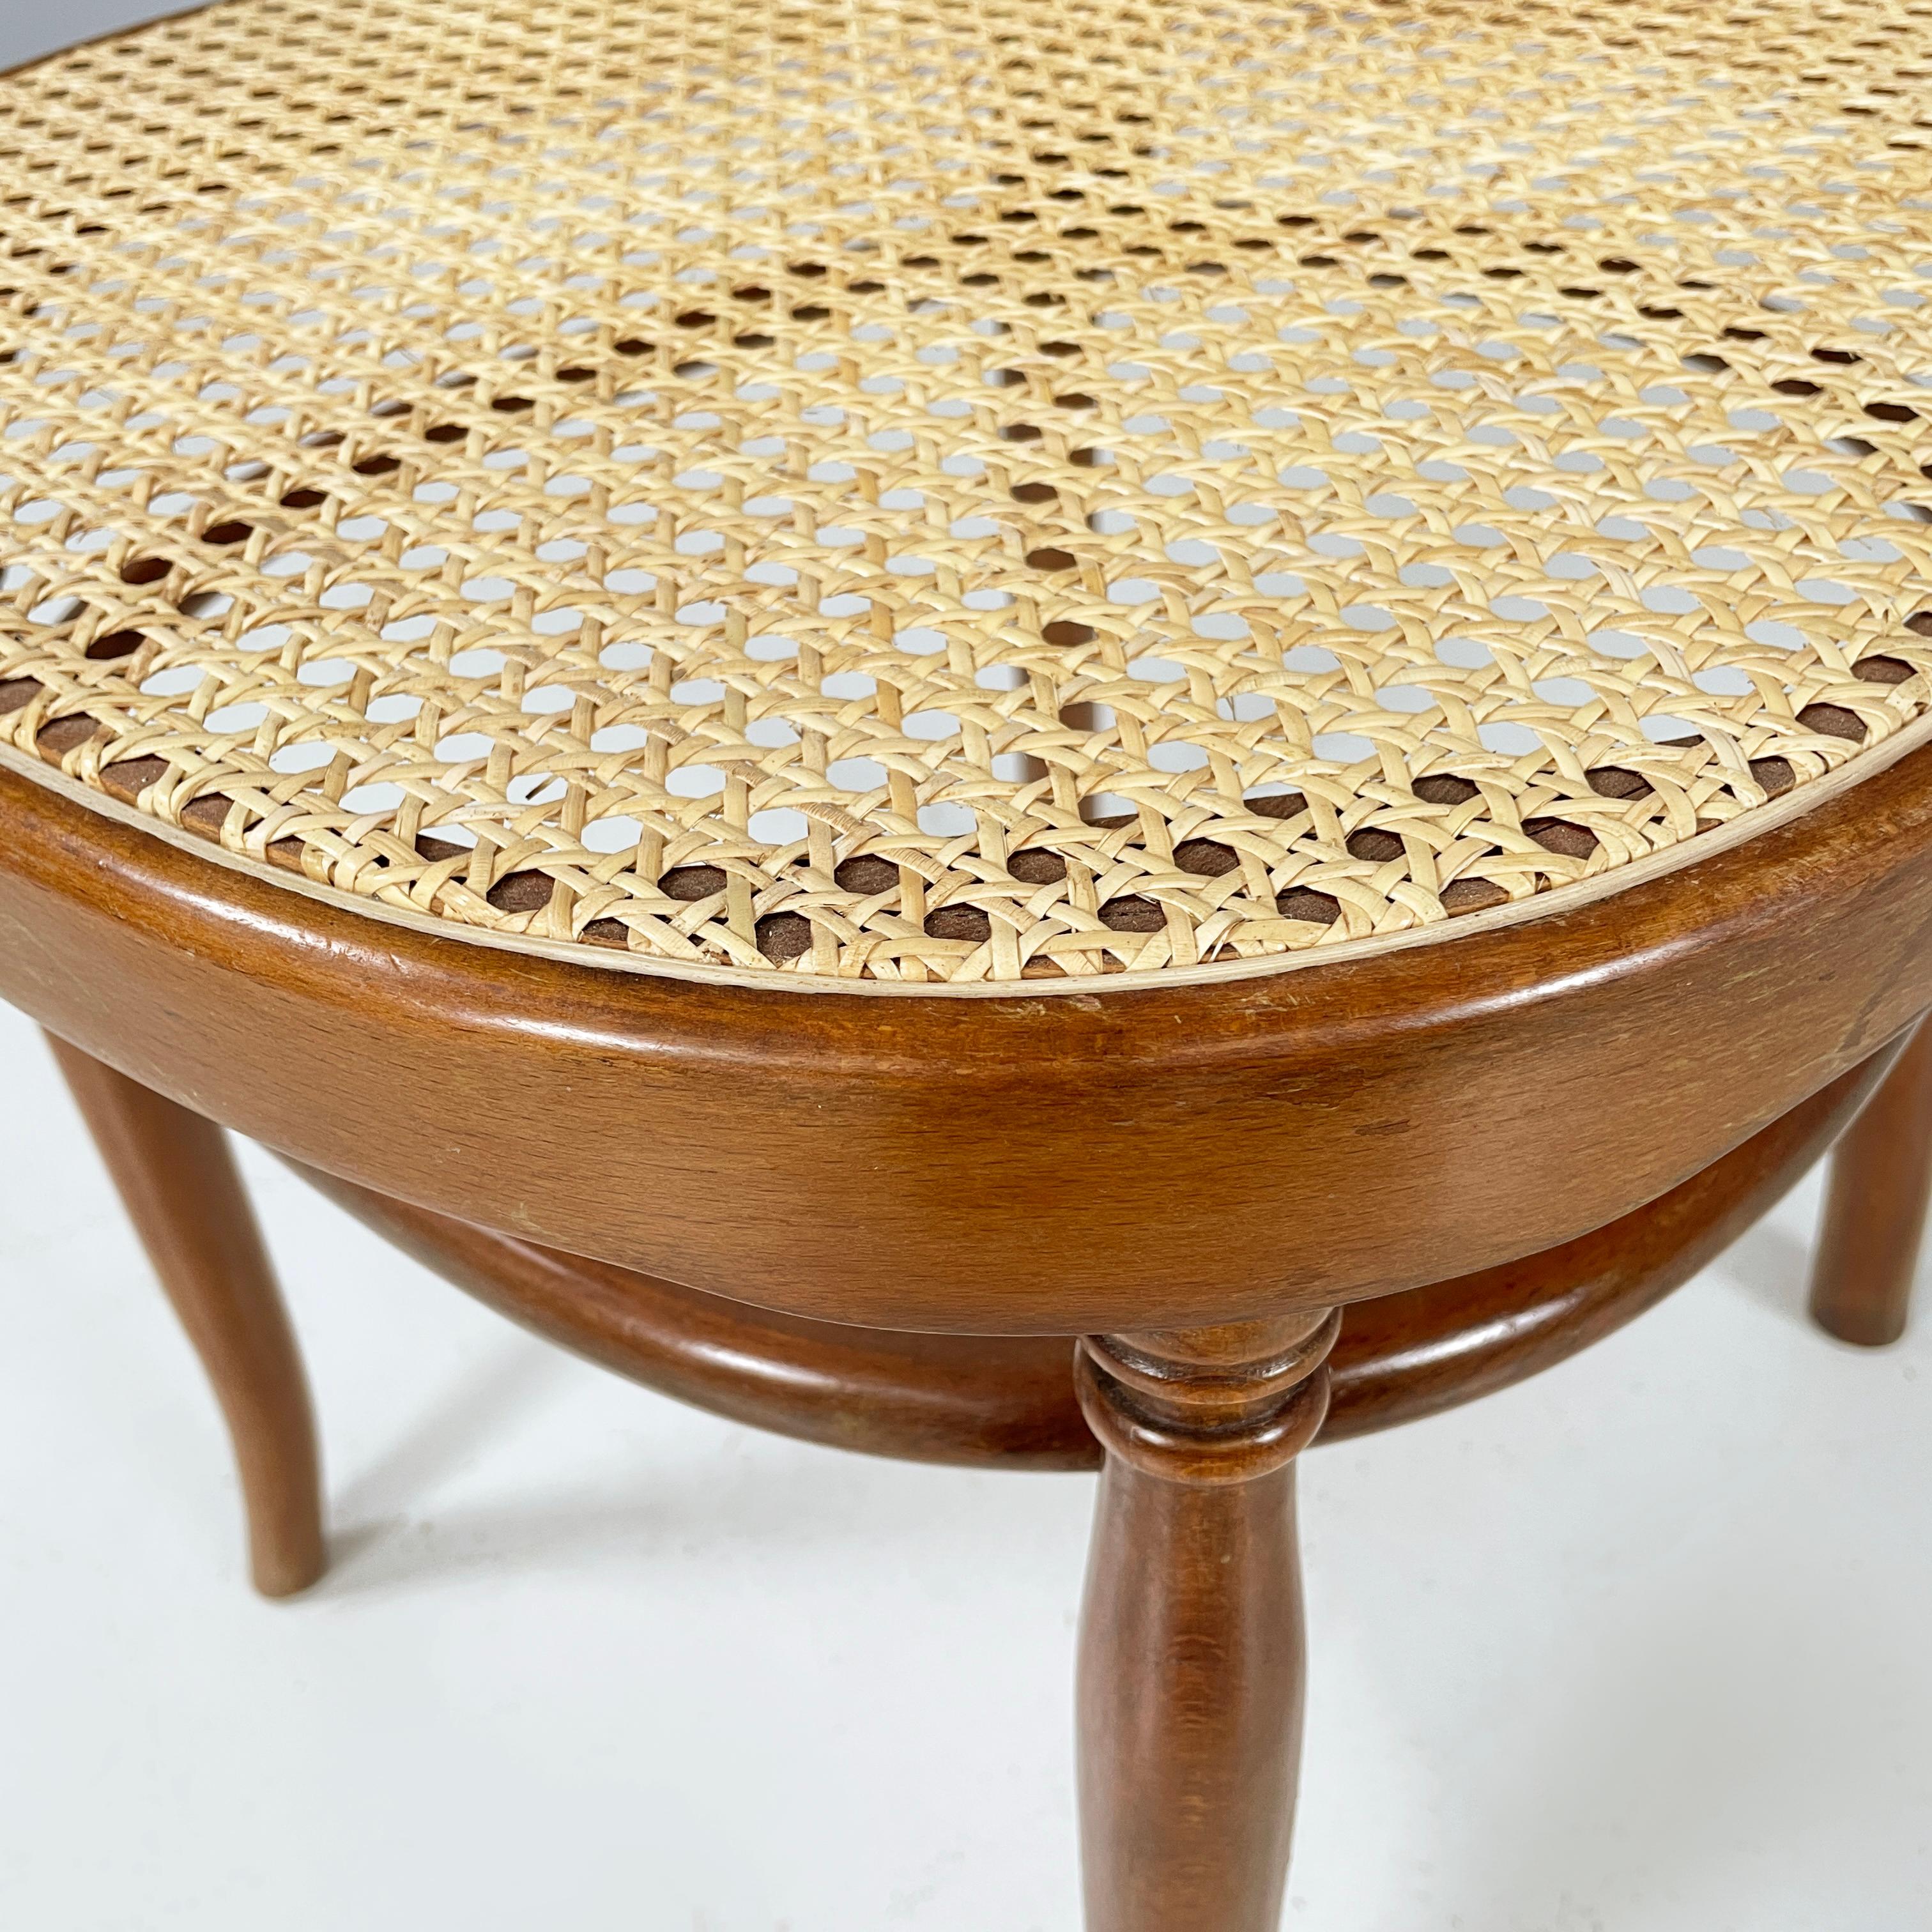 Italian Chair in straw and wood, 1900-1950s For Sale 7